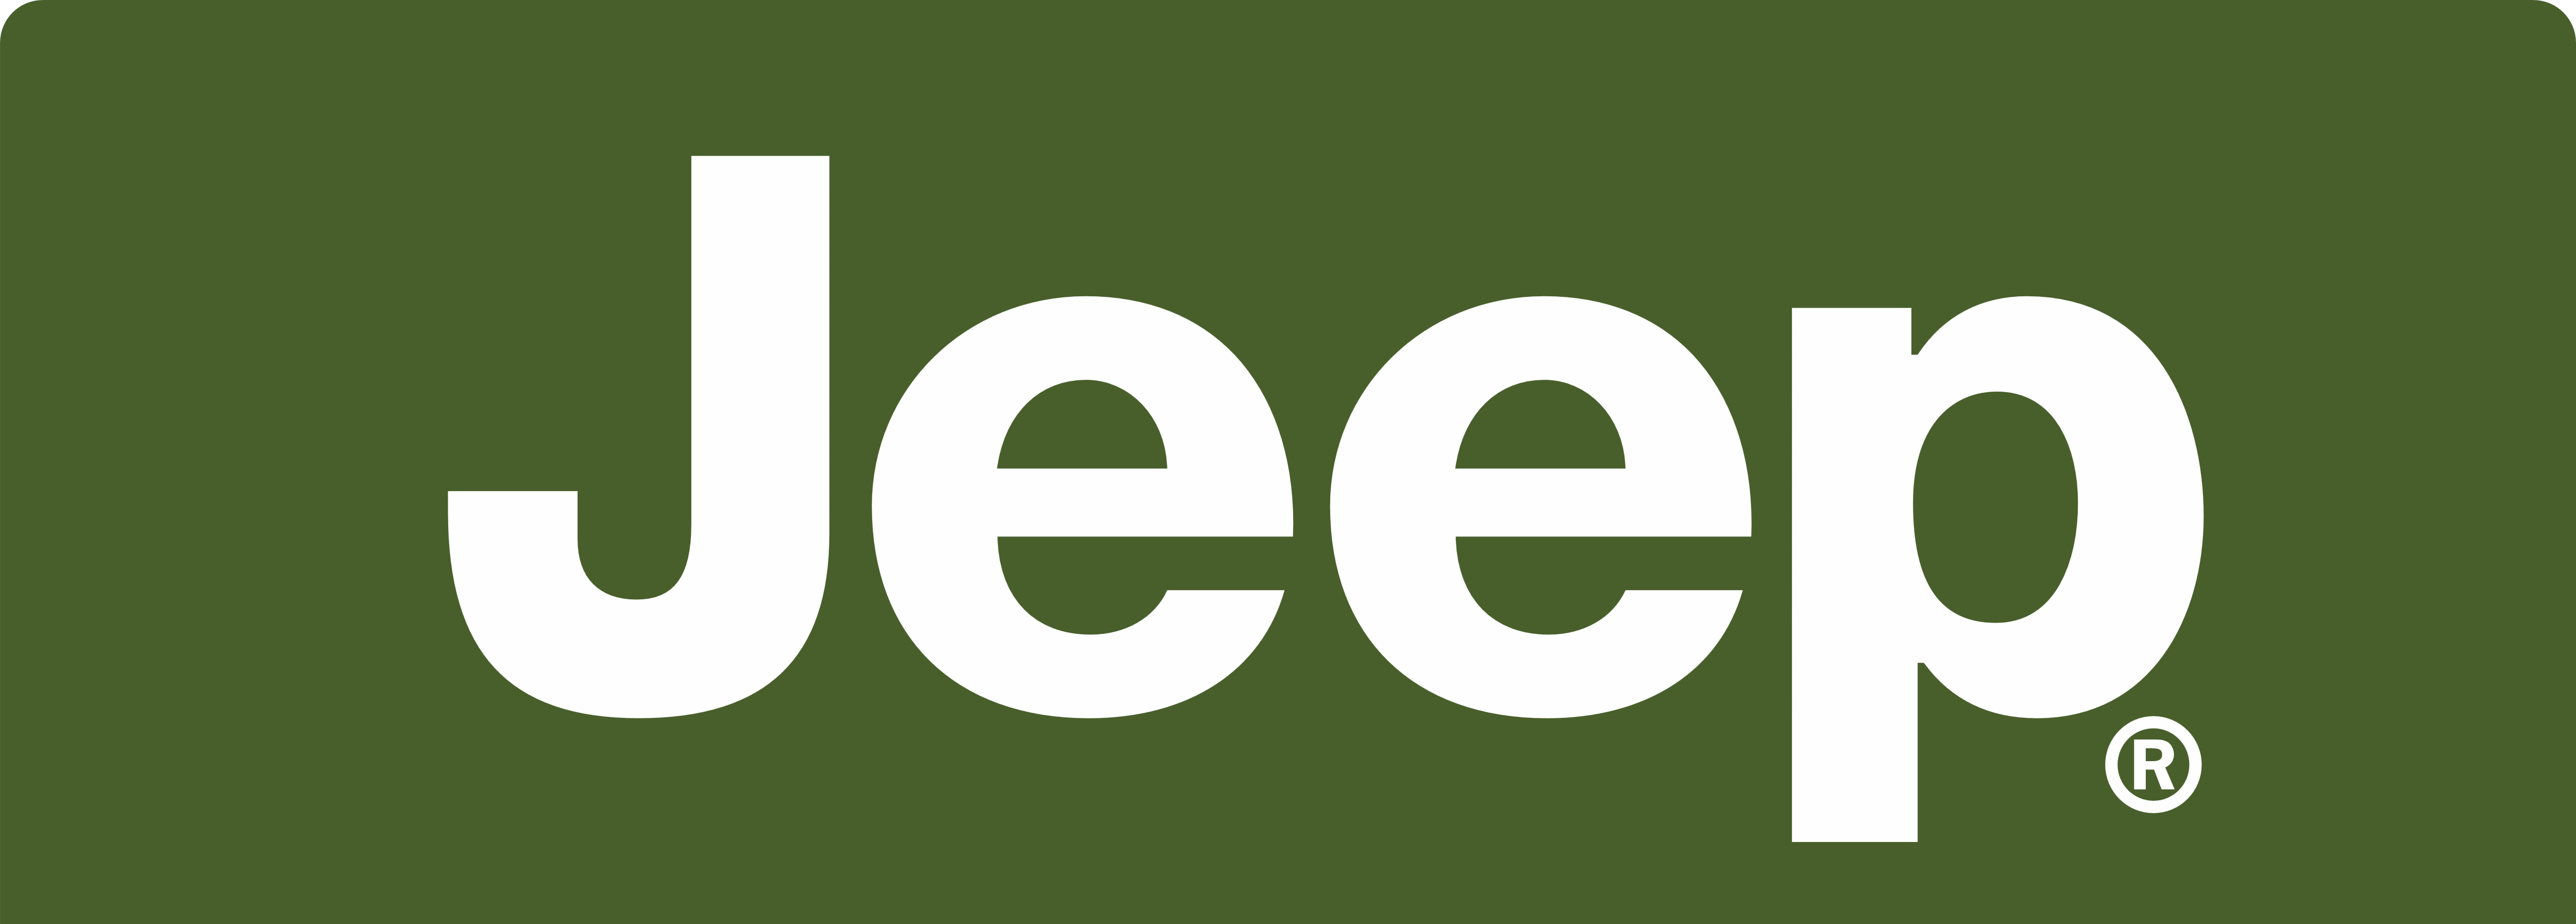 Jeep Logo PNG - 179064